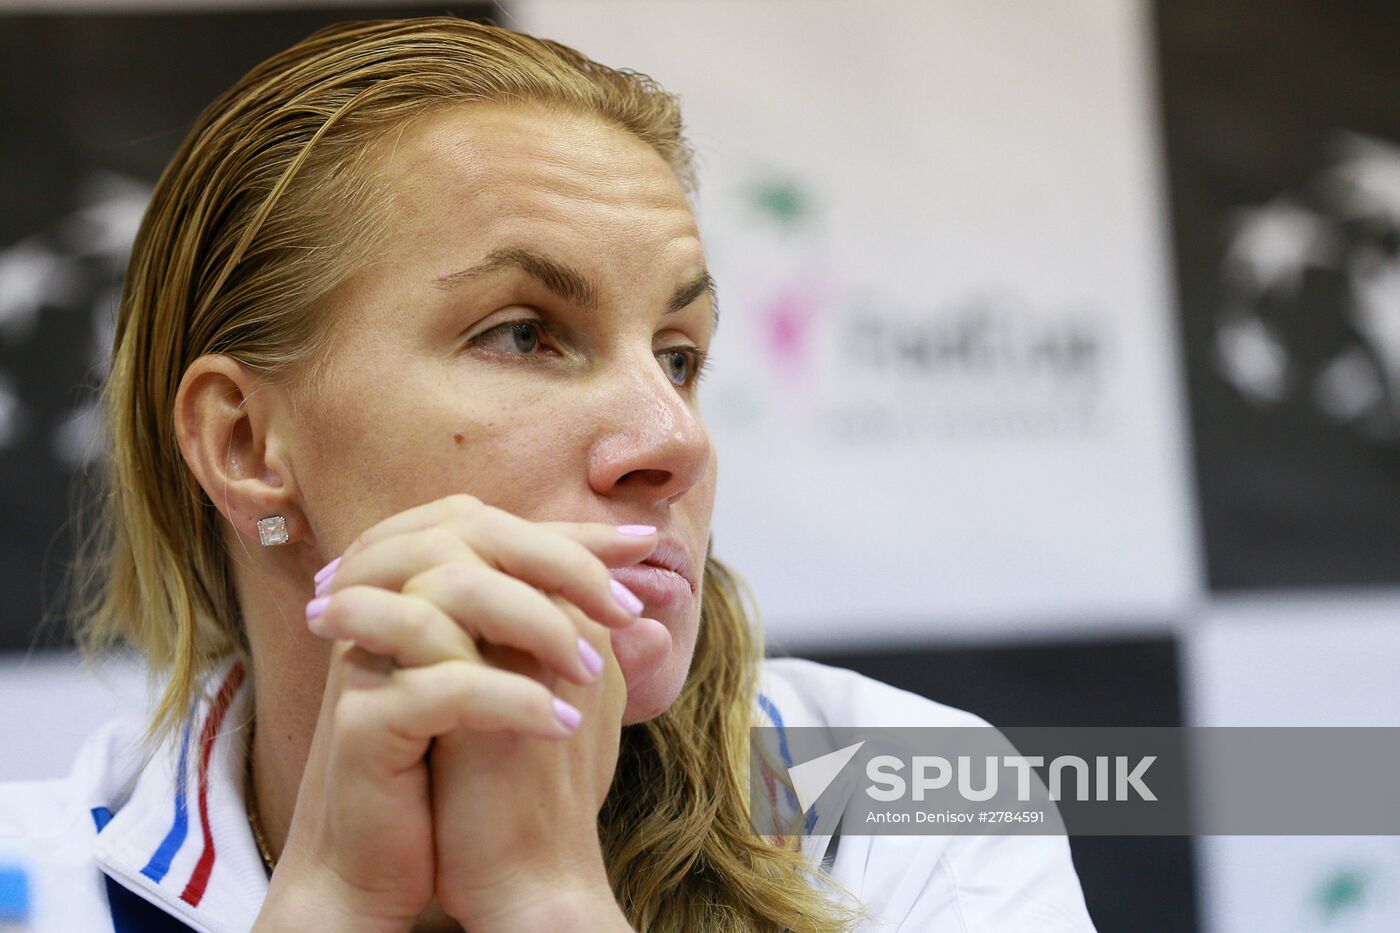 Tennis. Federation Cup. Russia vs. Netherlands. News conference